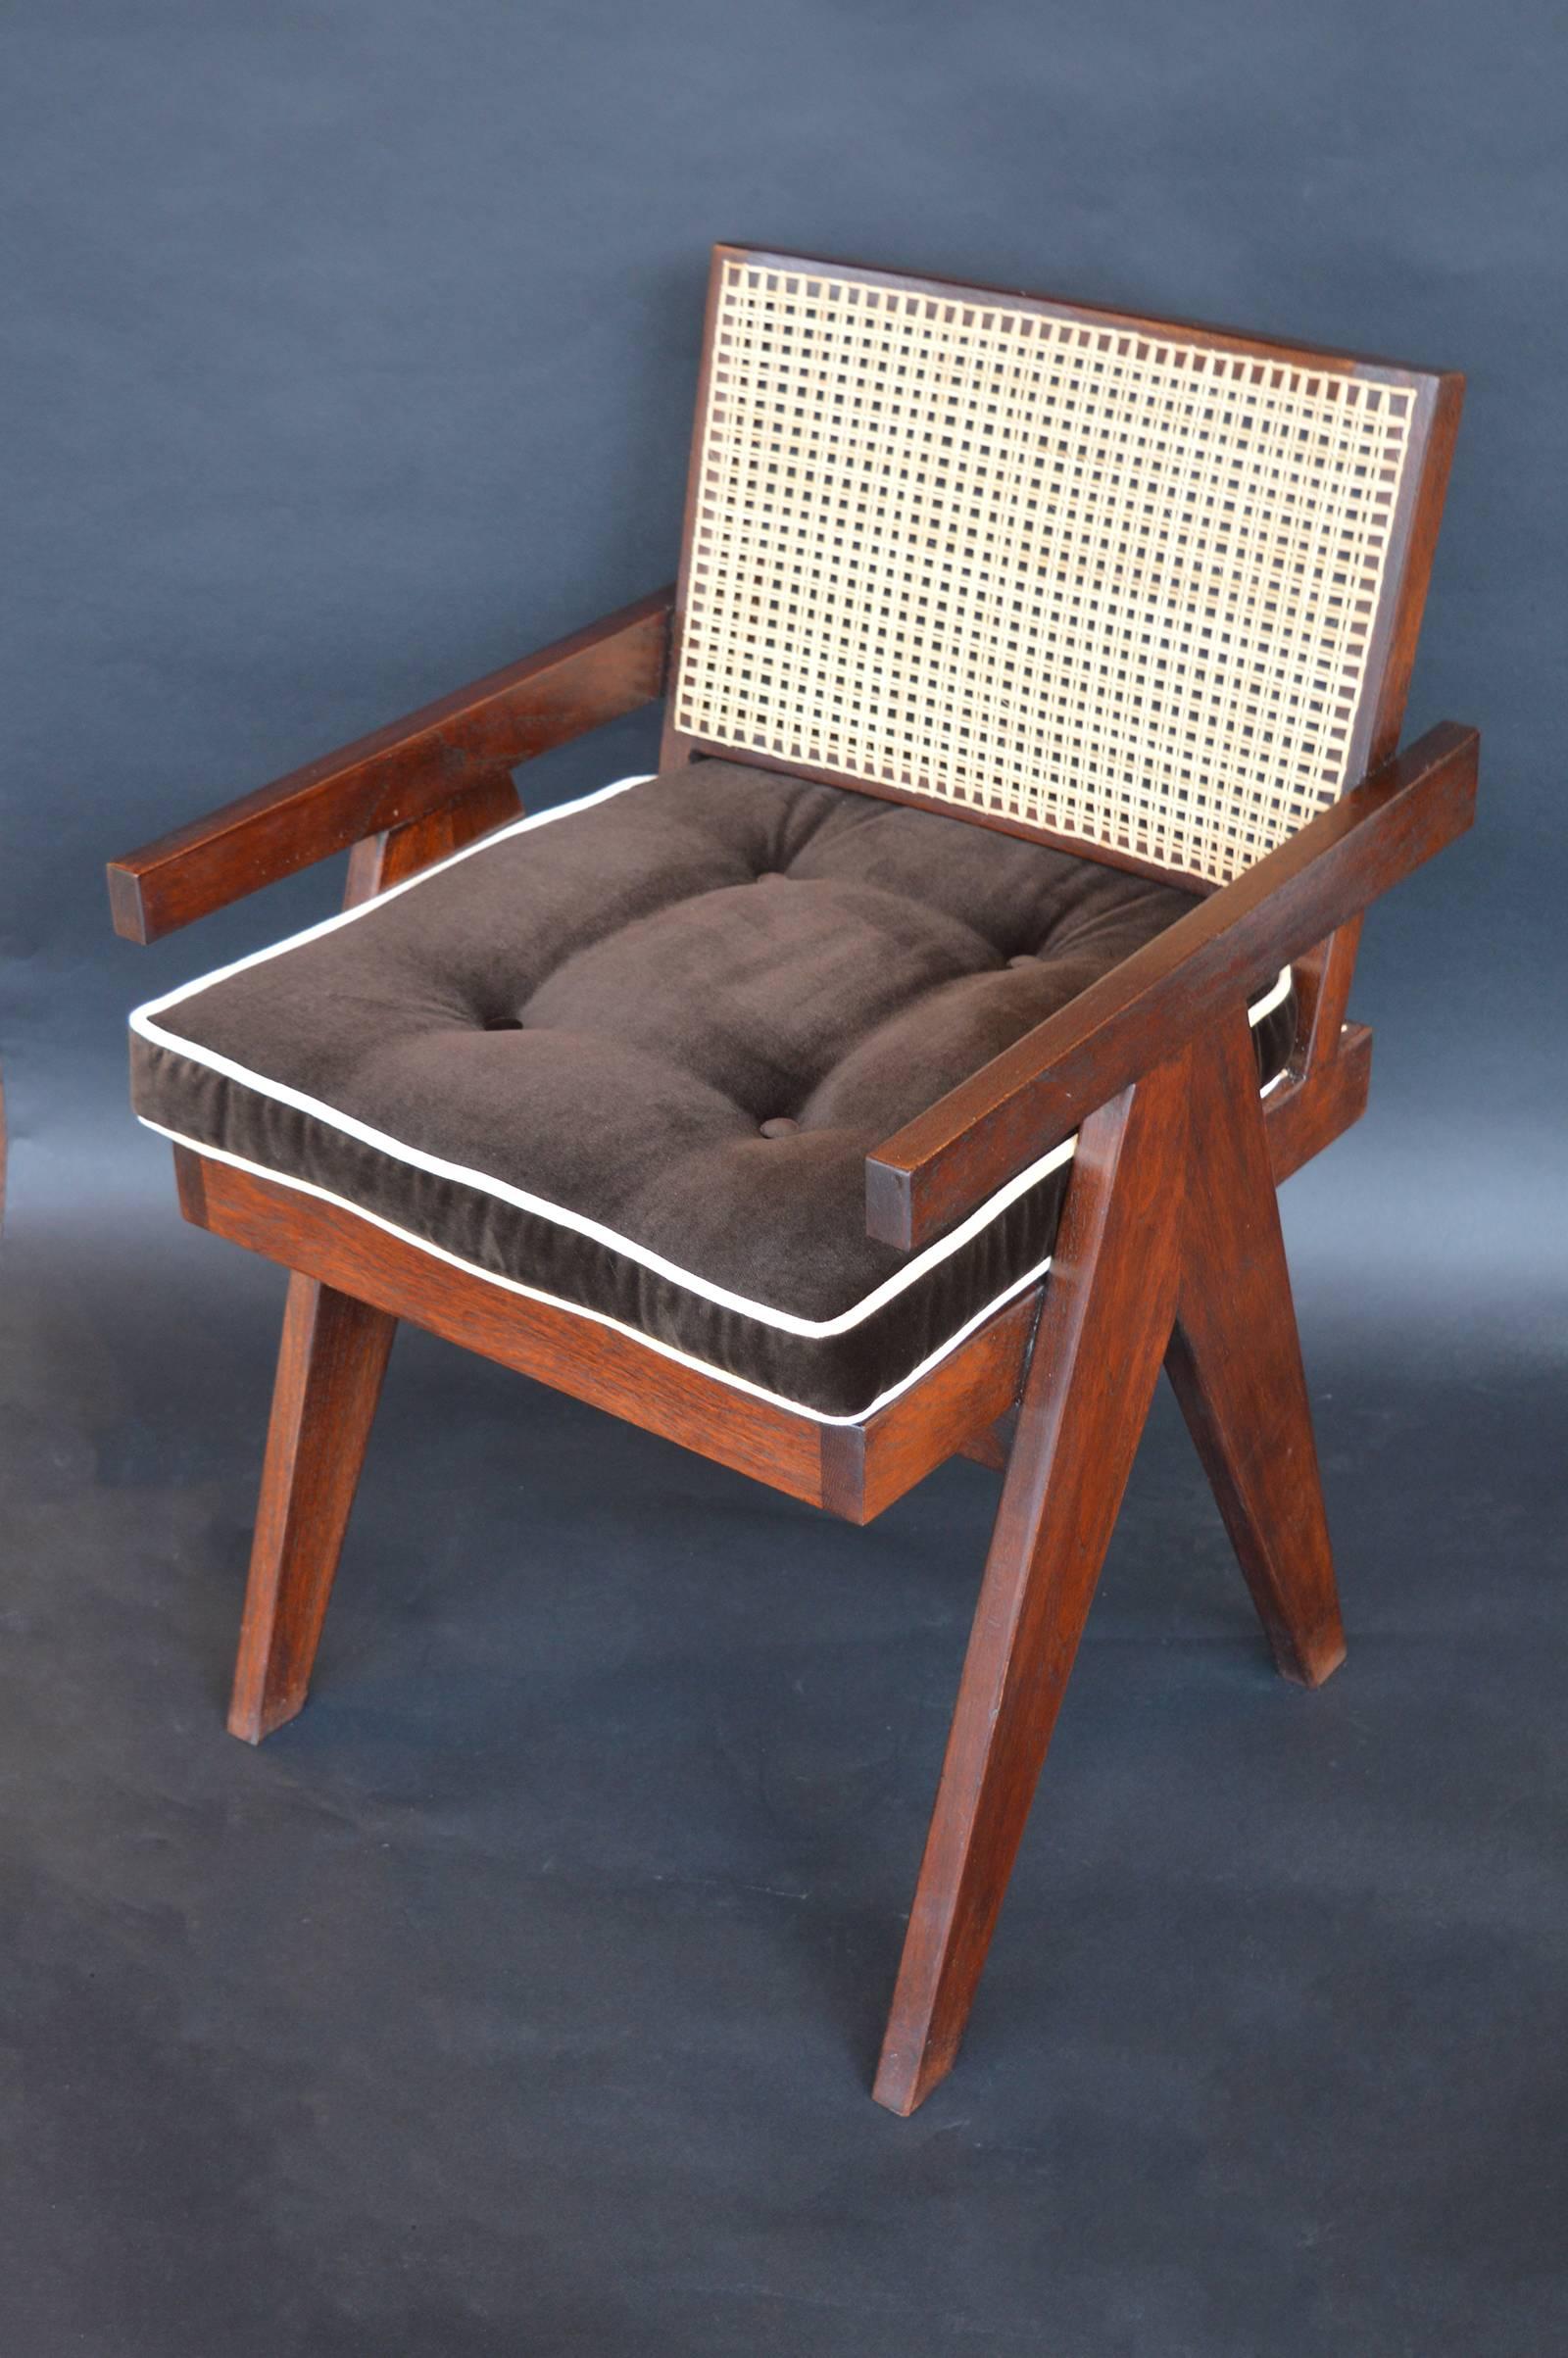 Set of 6 teak chairs in the style of Pierre Jeanneret.